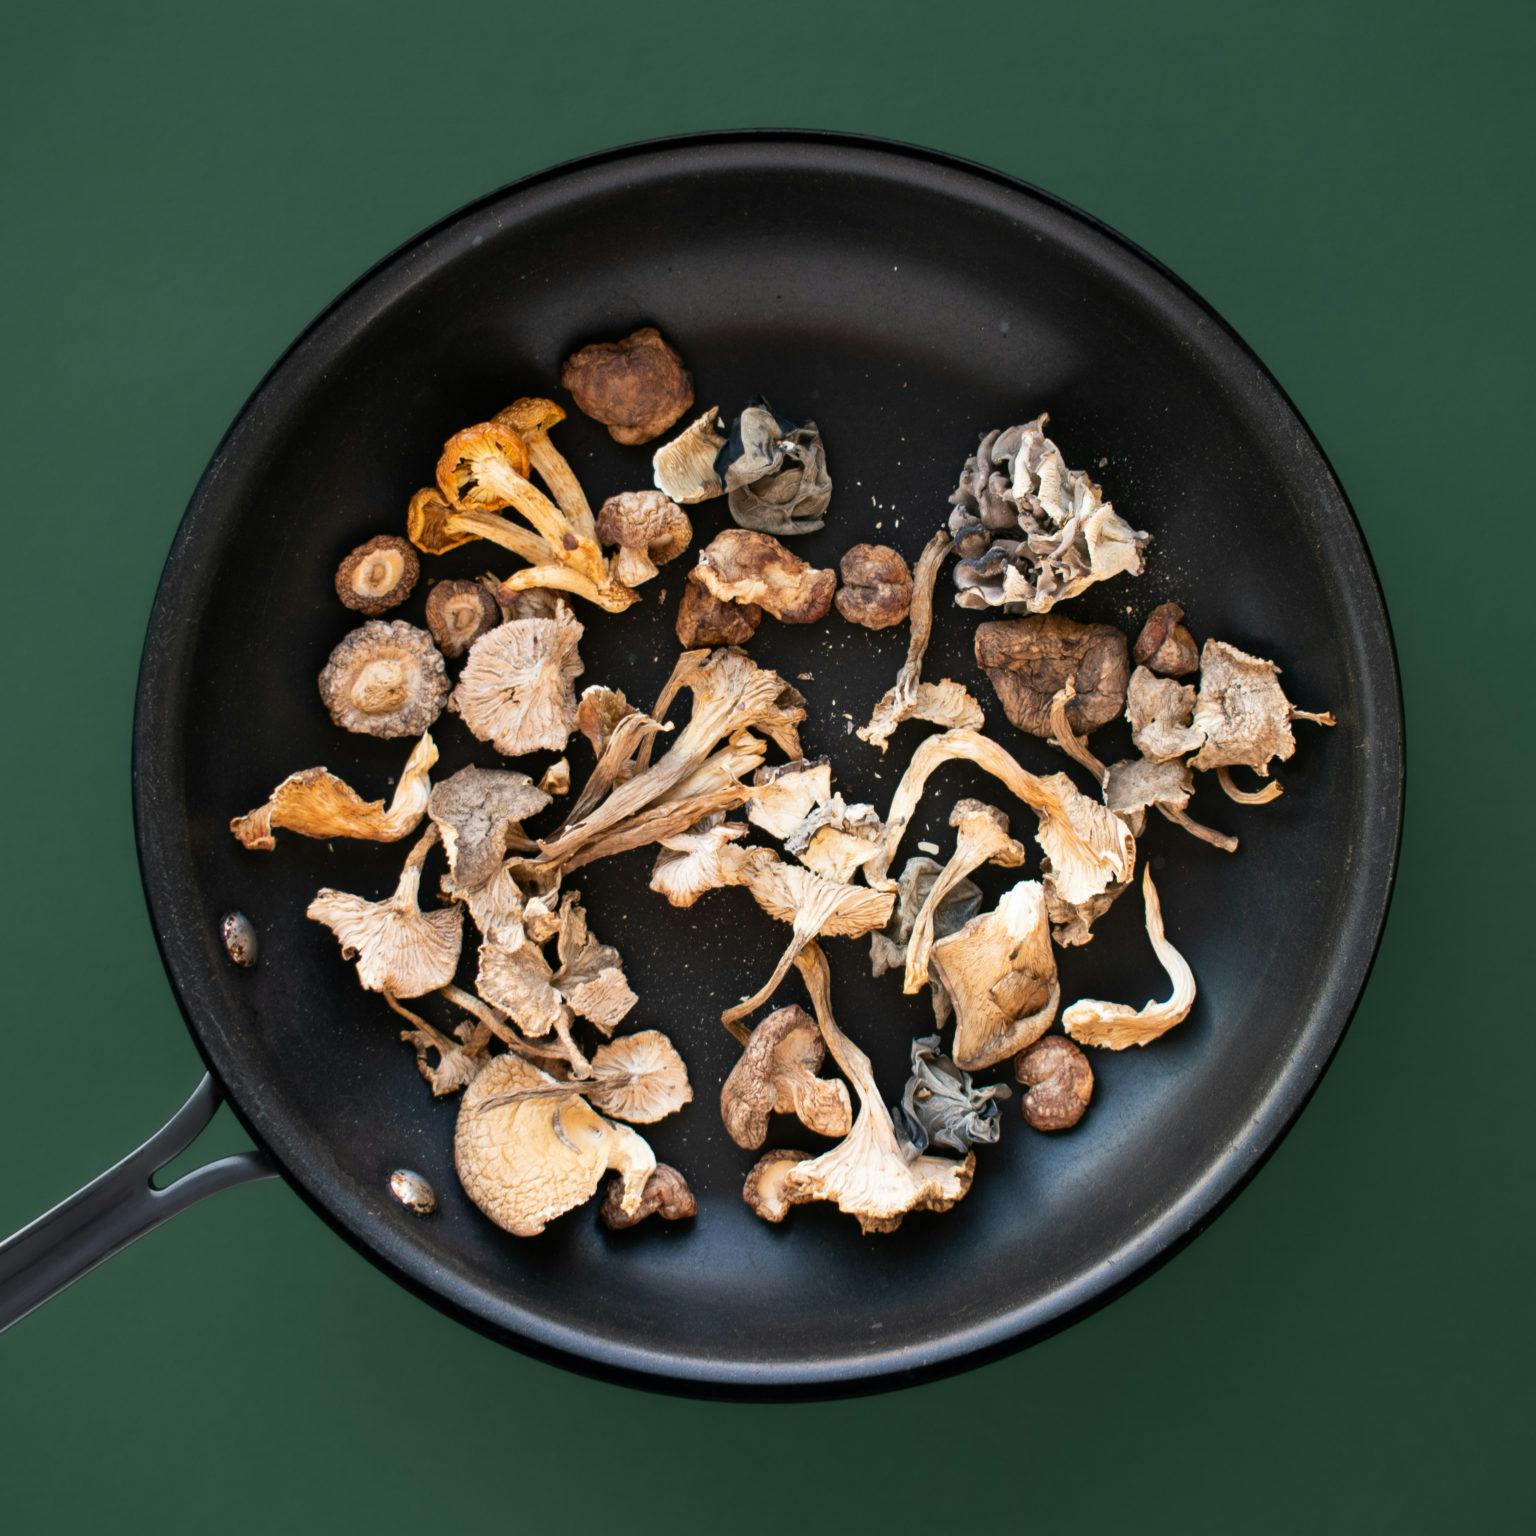 Place the dried mushrooms in the pan